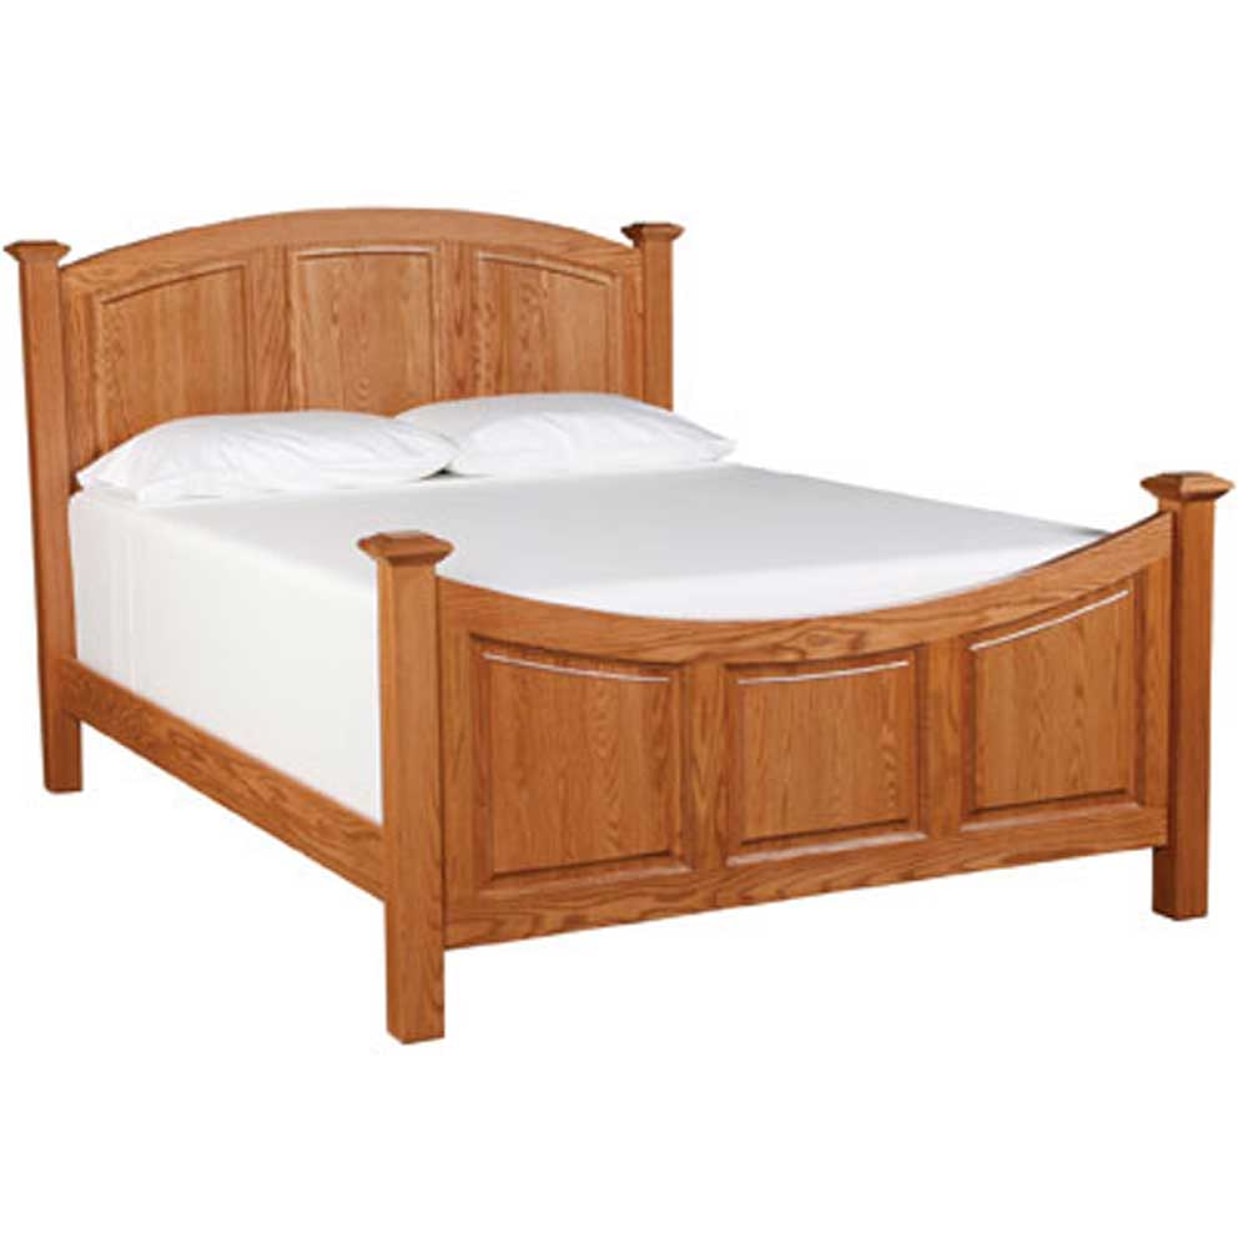 Simply Amish Homestead Amish Twin Lexington Bed